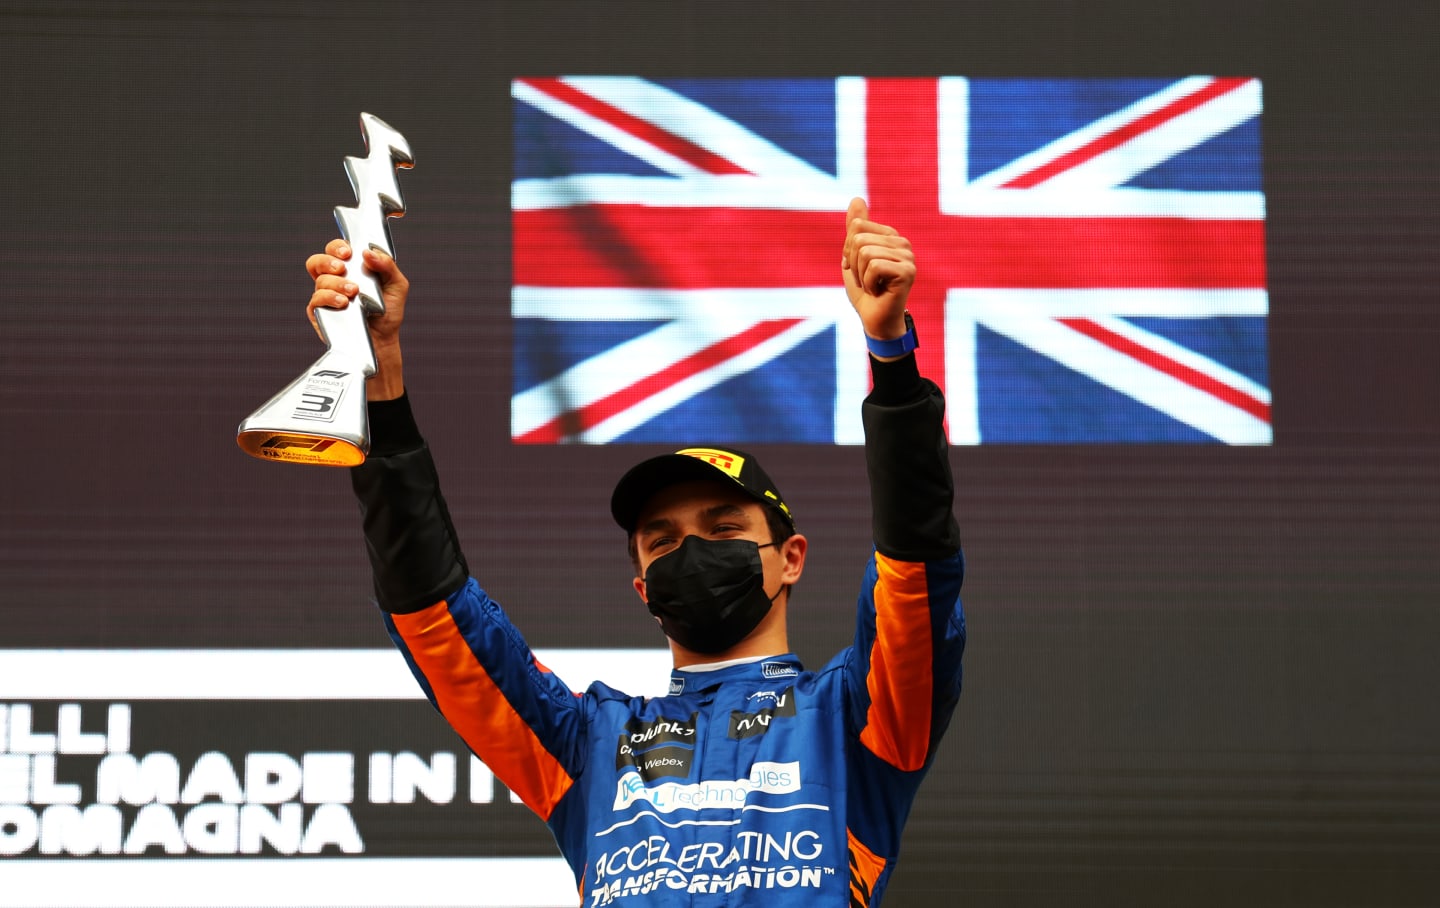 IMOLA, ITALY - APRIL 18: Third placed Lando Norris of Great Britain and McLaren F1 celebrates on the podium during the F1 Grand Prix of Emilia Romagna at Autodromo Enzo e Dino Ferrari on April 18, 2021 in Imola, Italy. (Photo by Bryn Lennon/Getty Images)